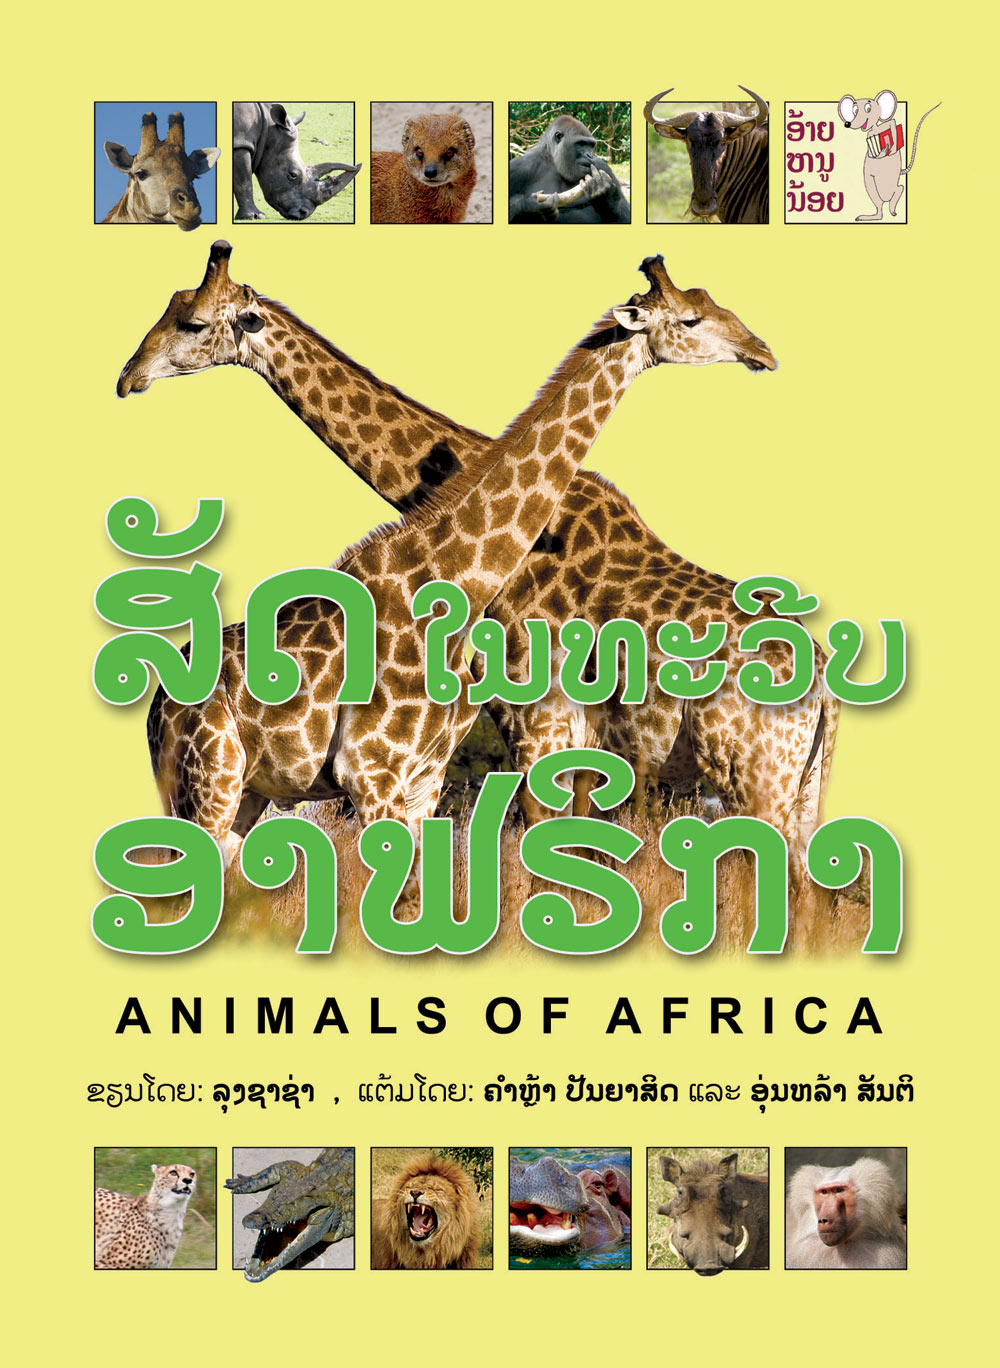 Animals of Africa large book cover, published in Lao and English